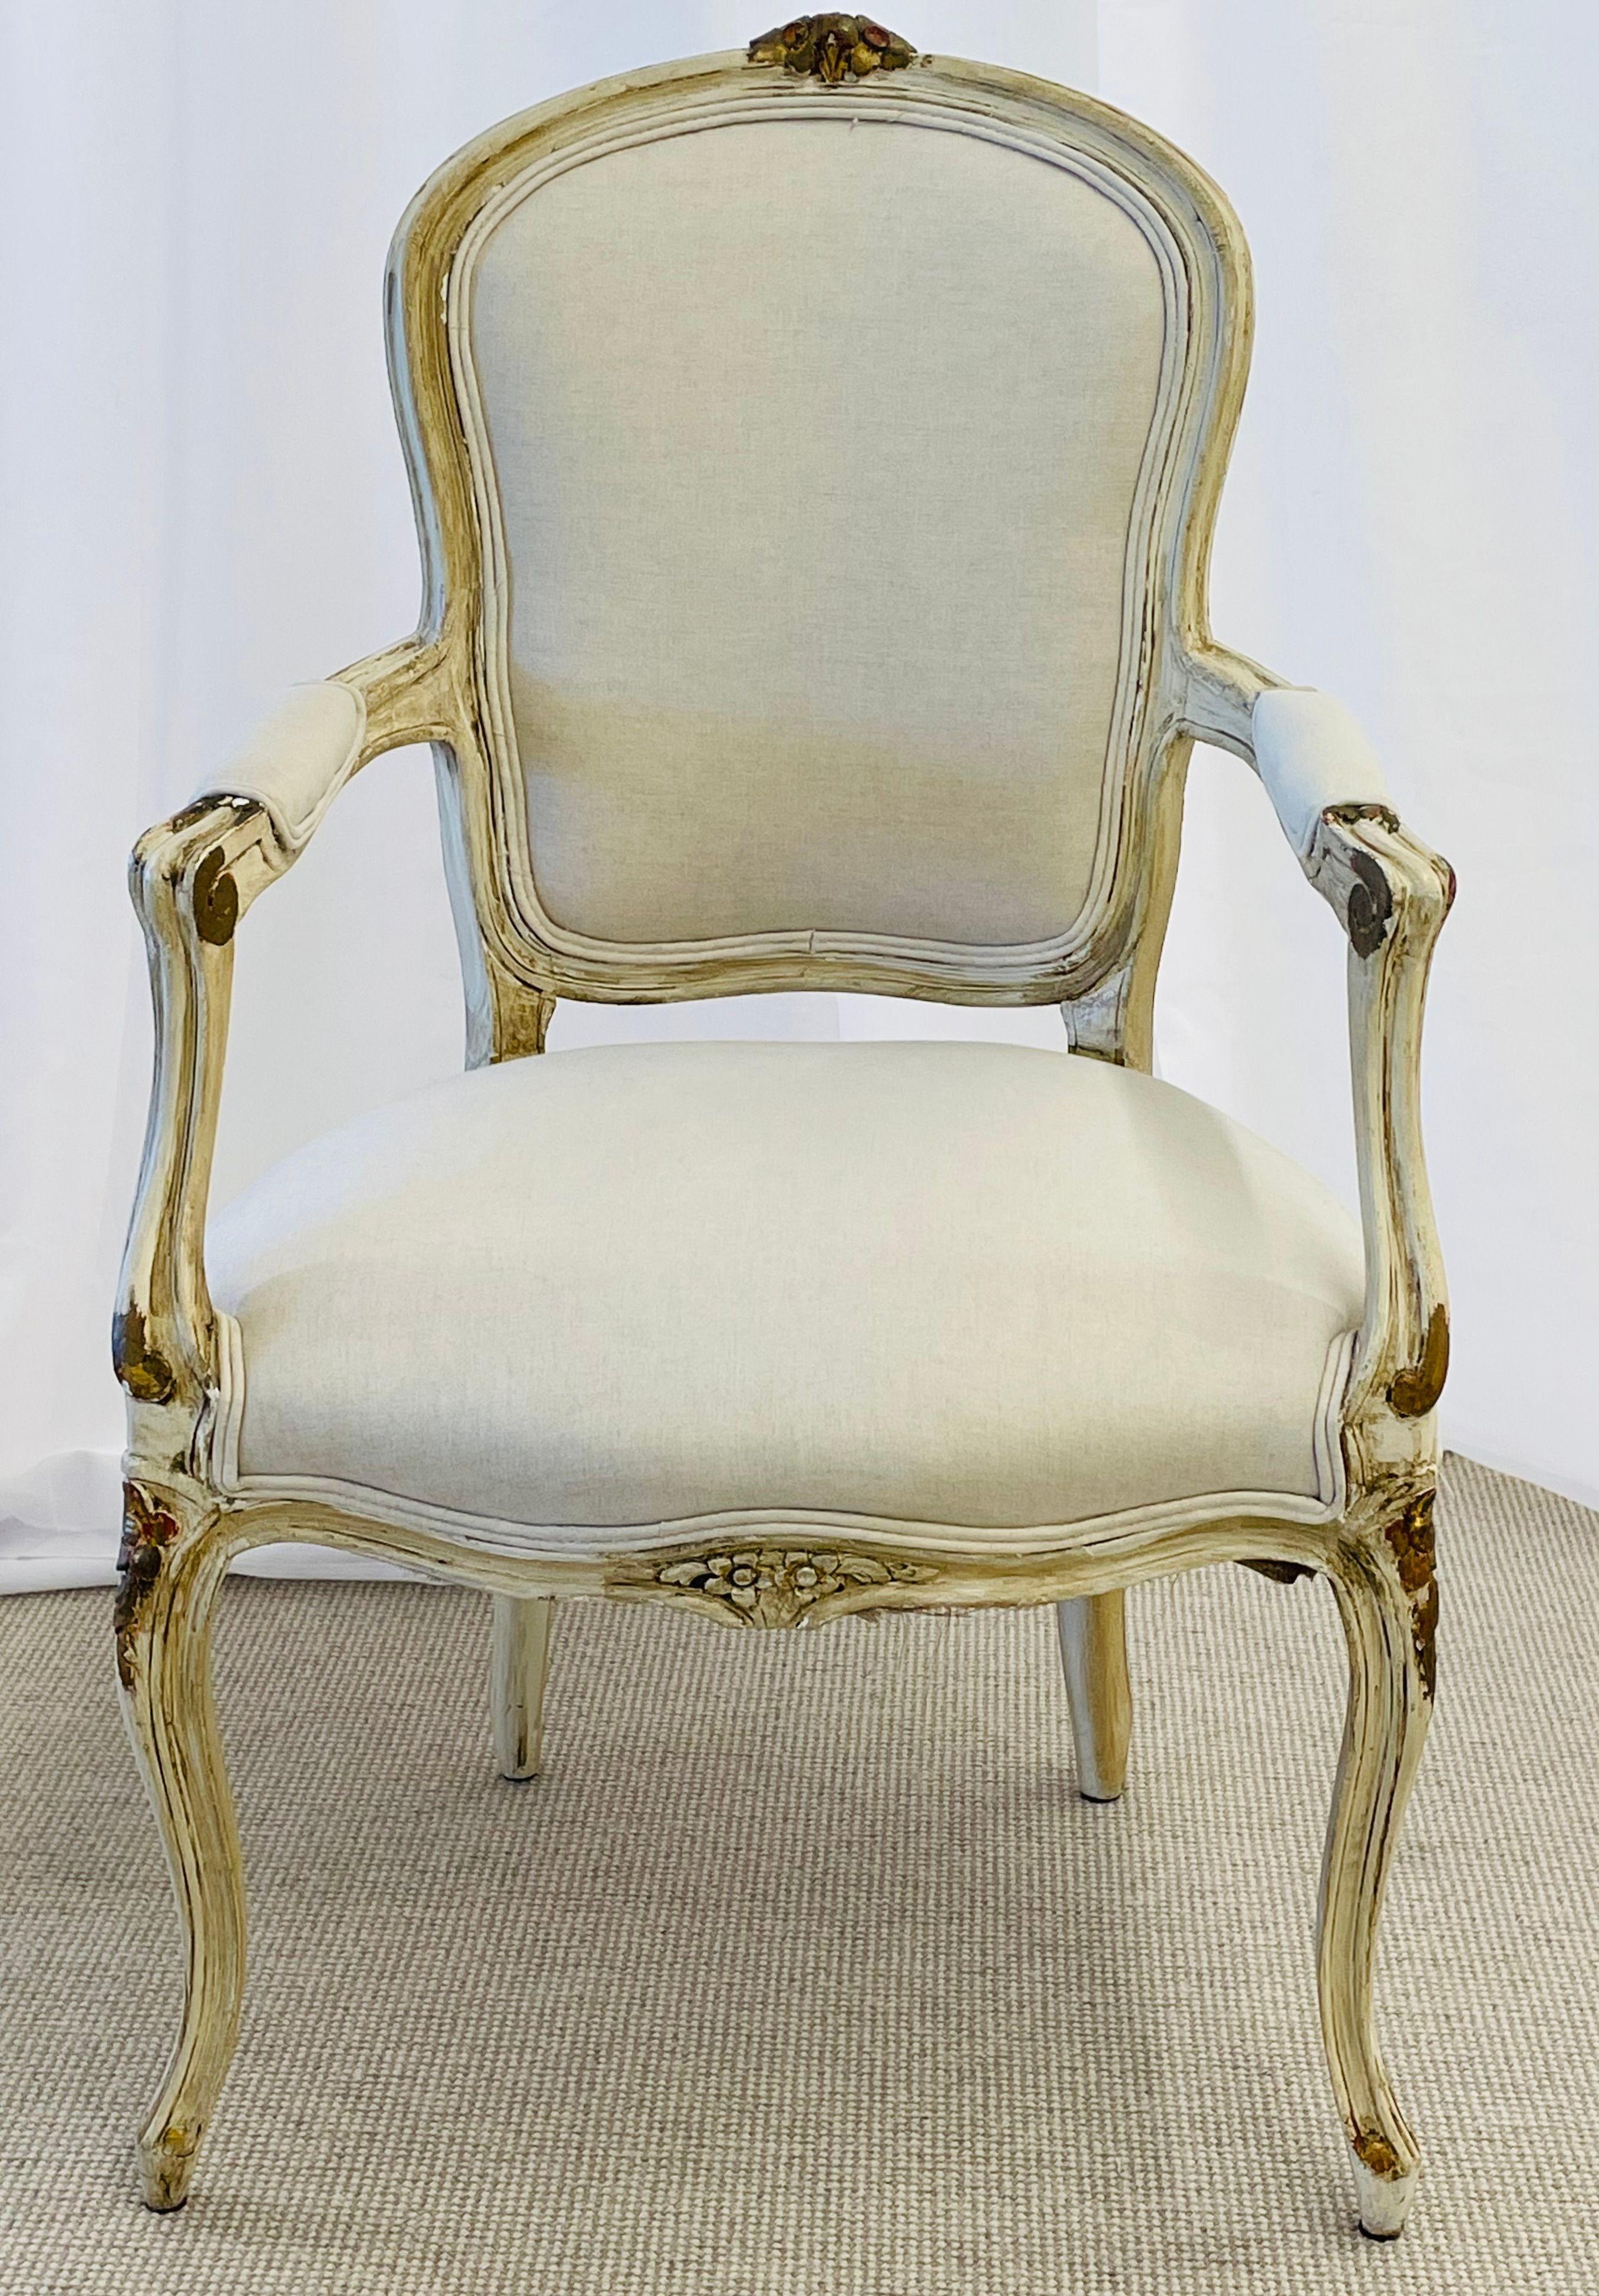 A set of 14 Maison Jansen Swedish style parcel paint and gilt decorated dining chairs. A stunning set of 14 dining chairs, many stamped Jansen, each in a cotton fabric that needs to be cleaned. The frames all paint and parcel gilt decorated with a